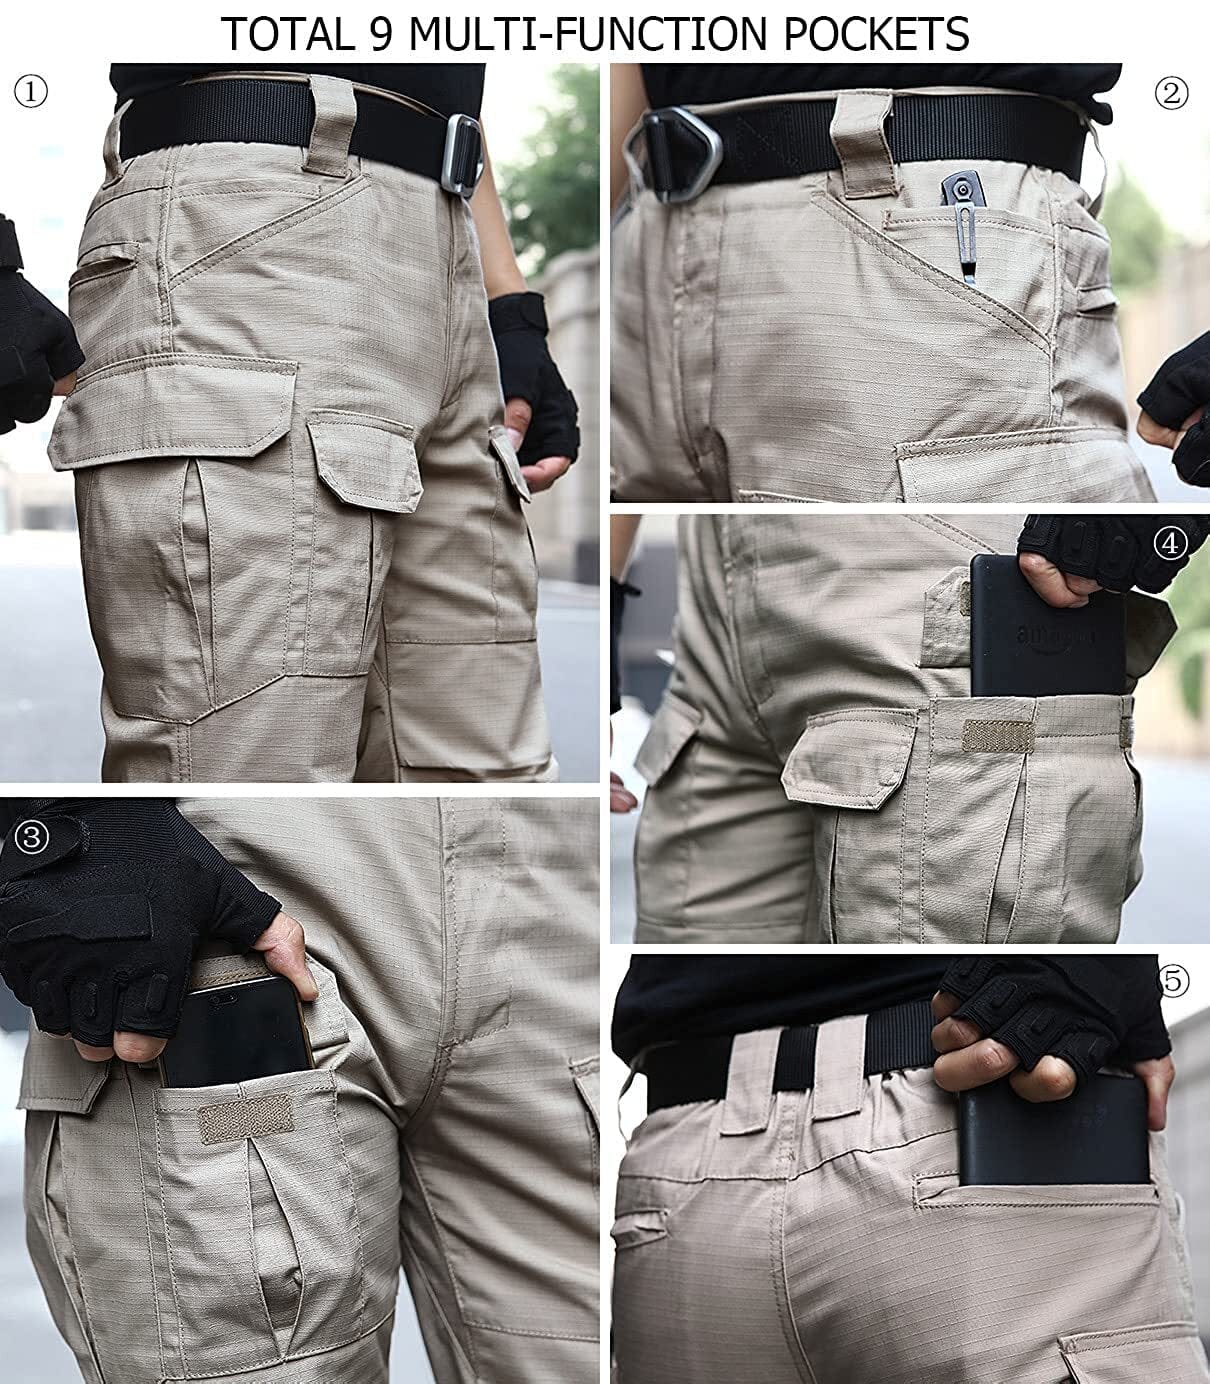 Operator Tactical Pants | Legacy Safety and Security